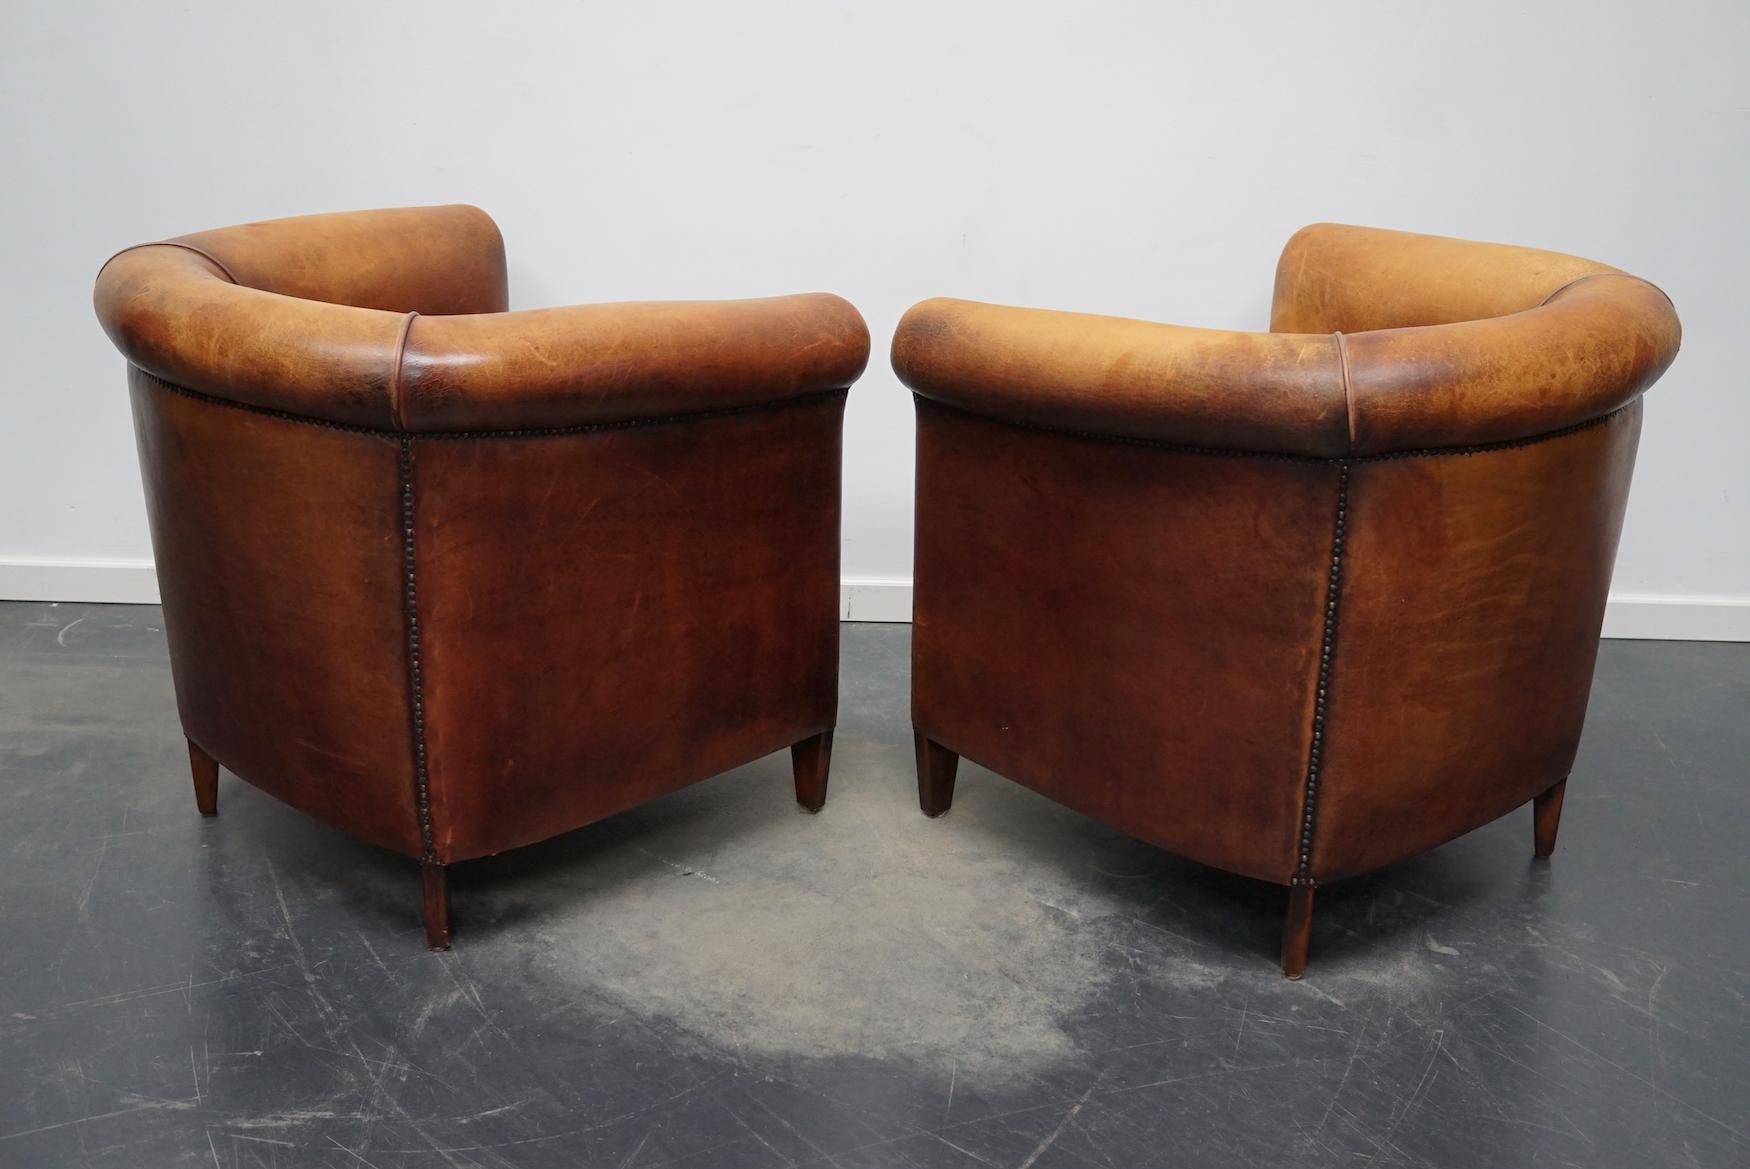 Late 20th Century Vintage Dutch Cognac Colored Leather Club Chair, Set of 2